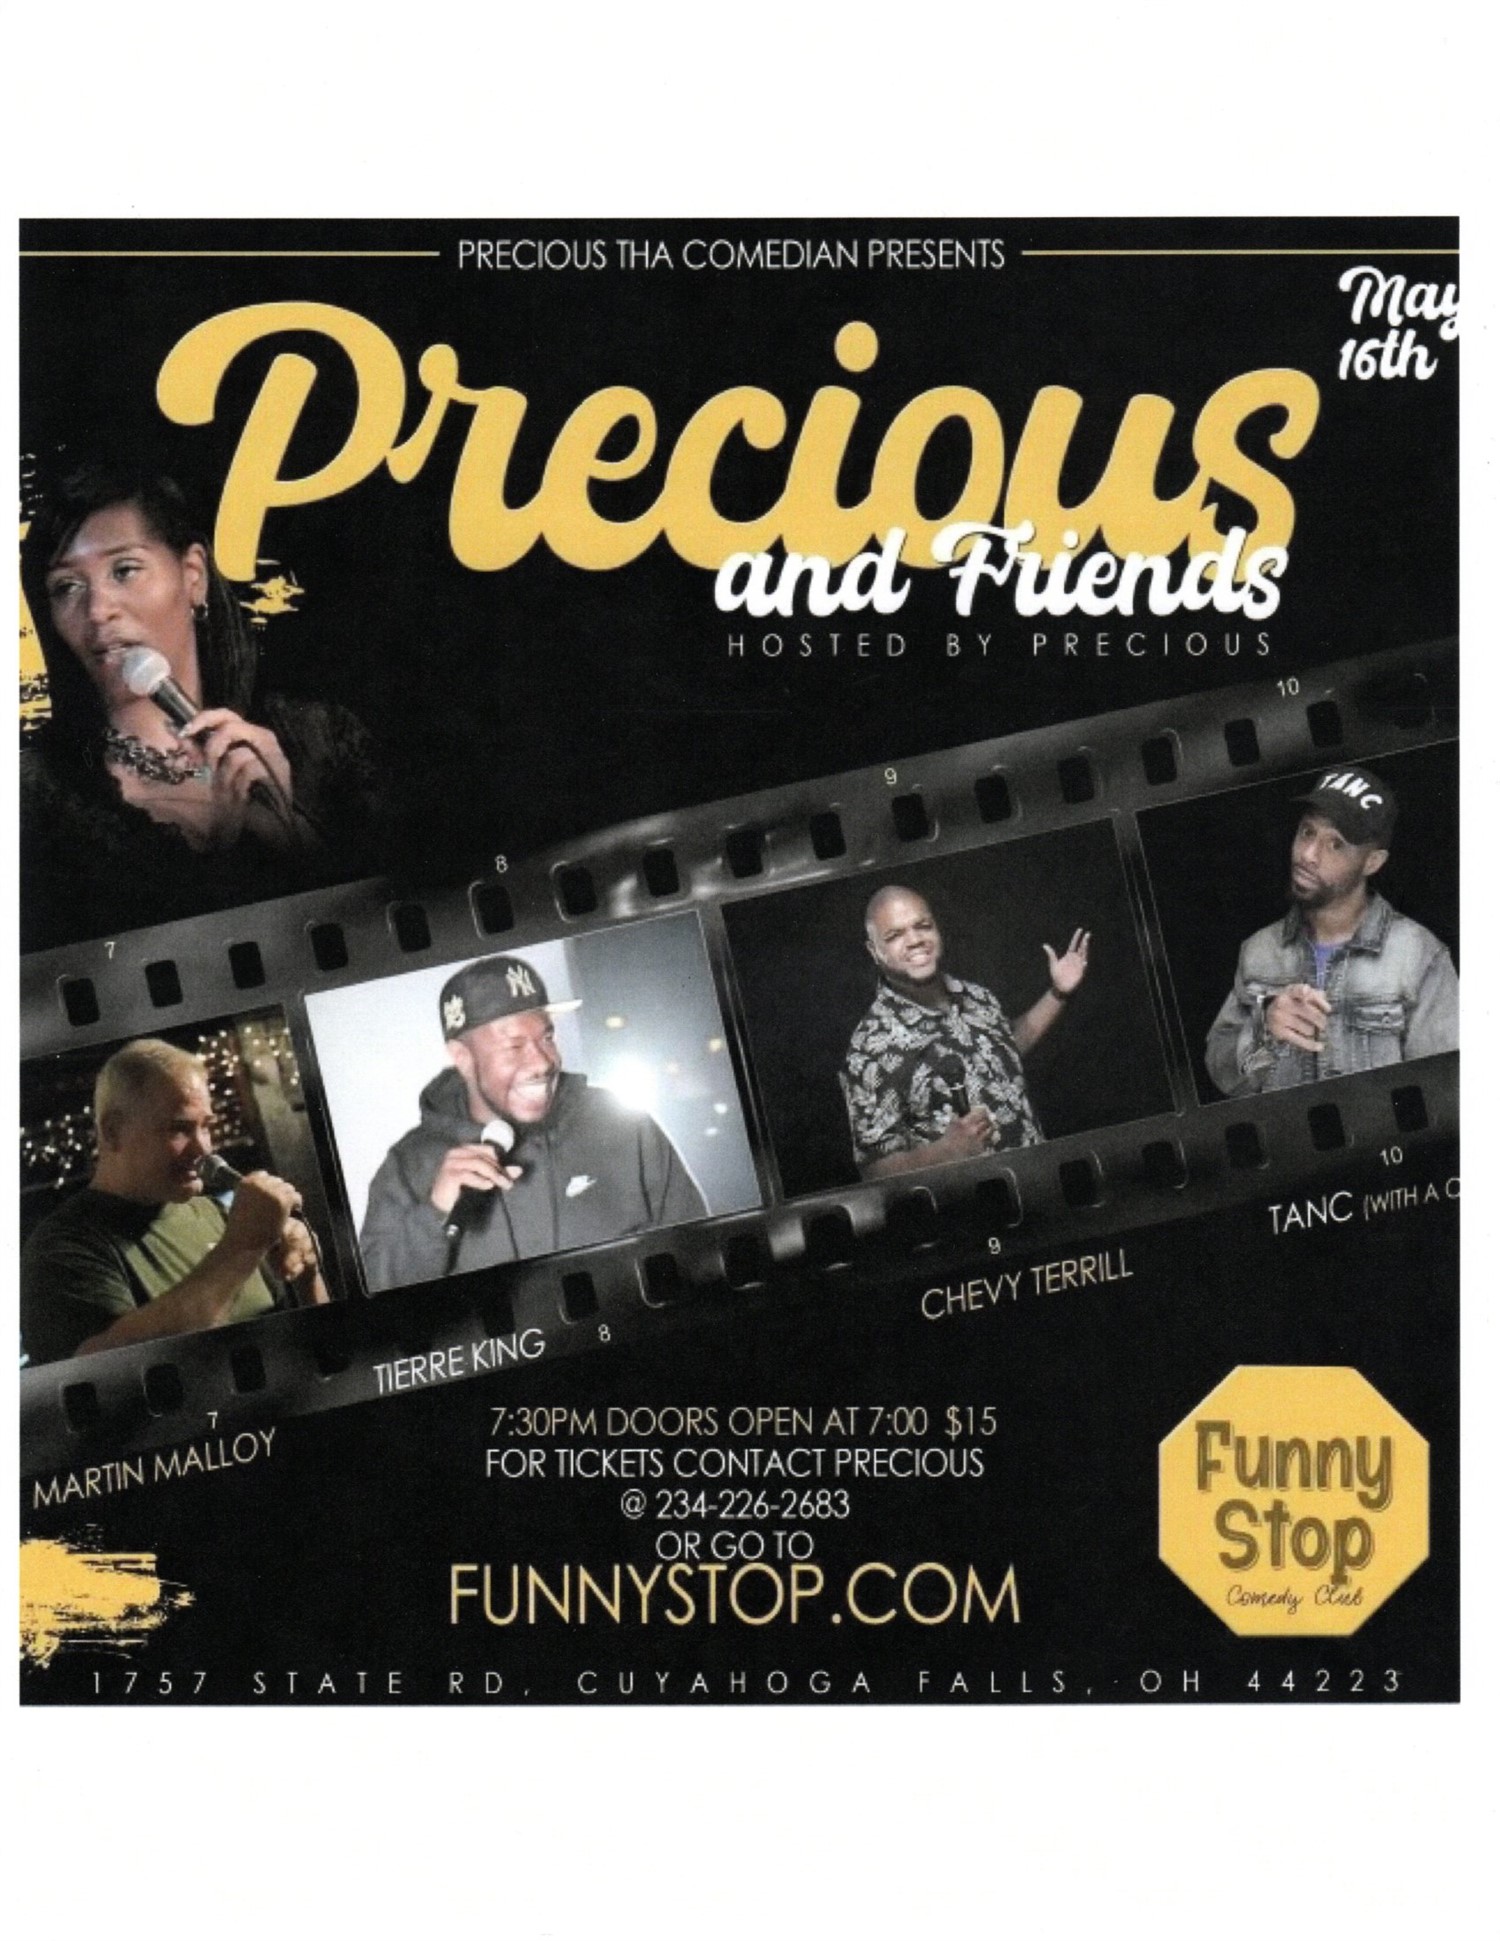 Precious & Friends Funny Stop Comedy Club on may. 16, 20:00@Funny Stop Comedy Club - Compra entradas y obtén información enFunny Stop funnystop.online